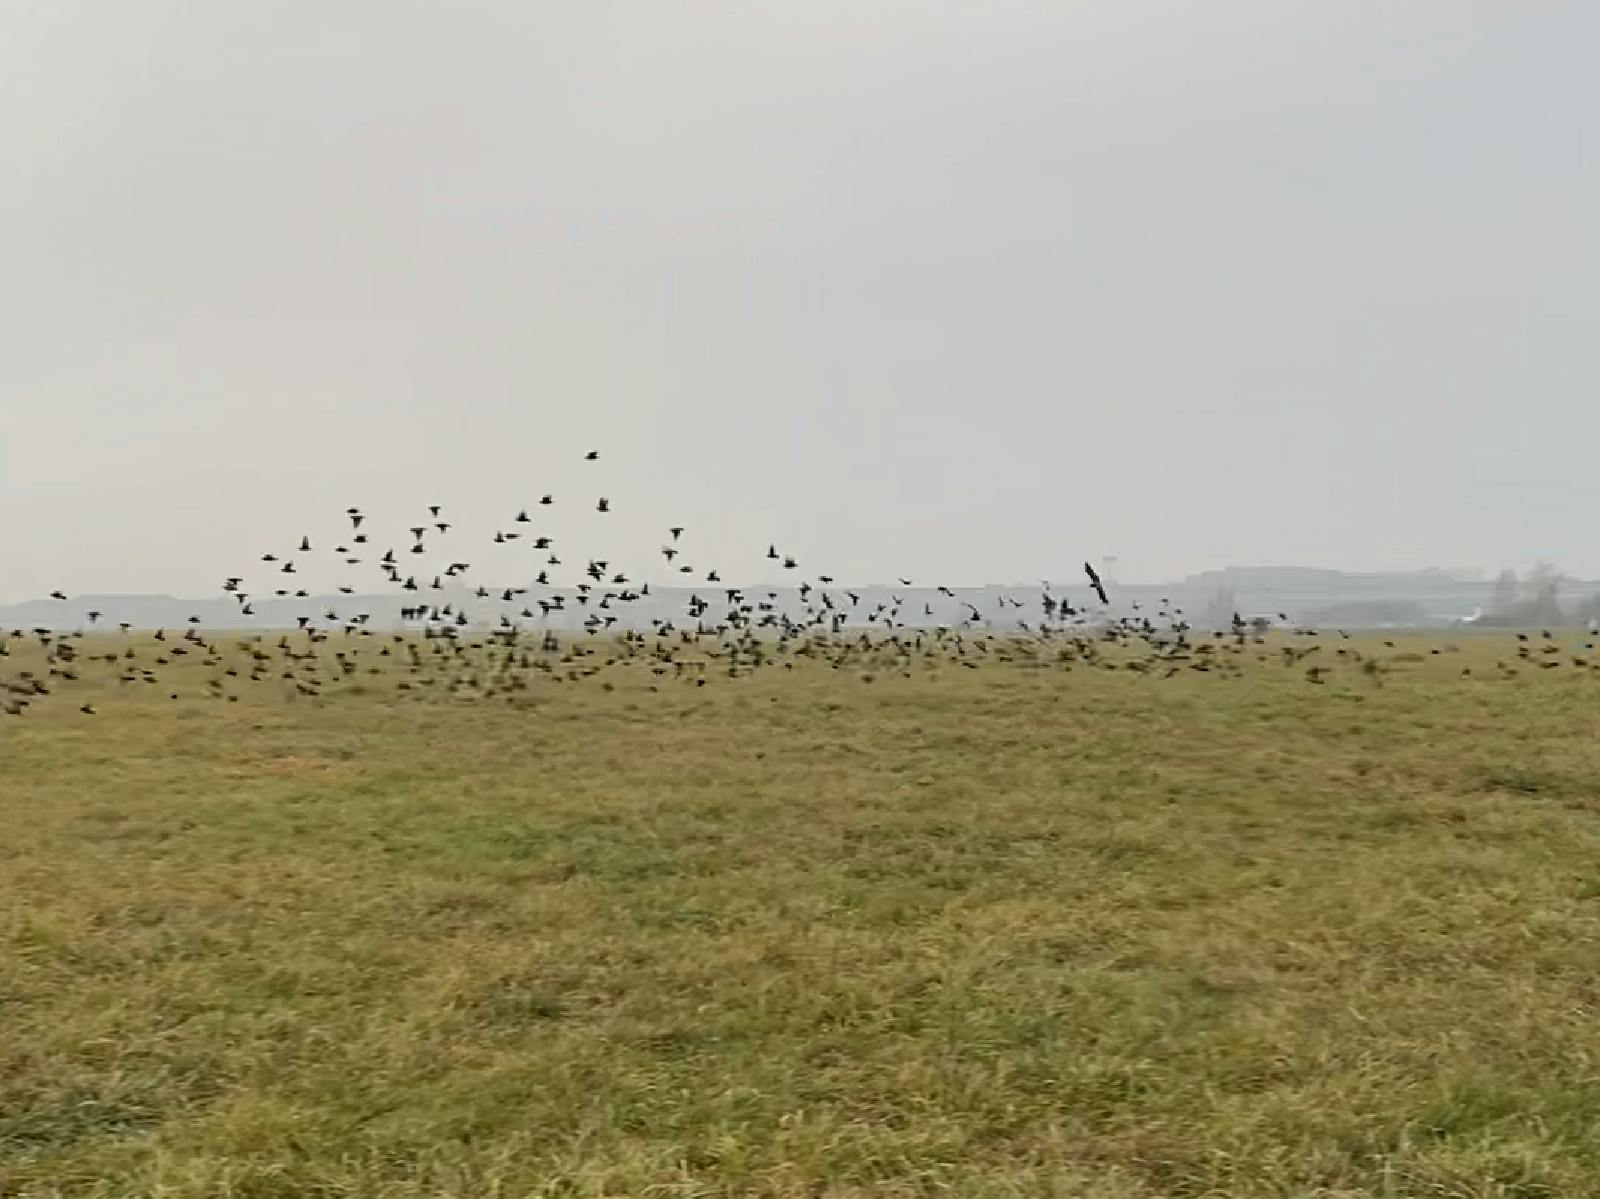 A flock of black starlings swoops low over a grassy field. The backdrop is a misty grey-blue.